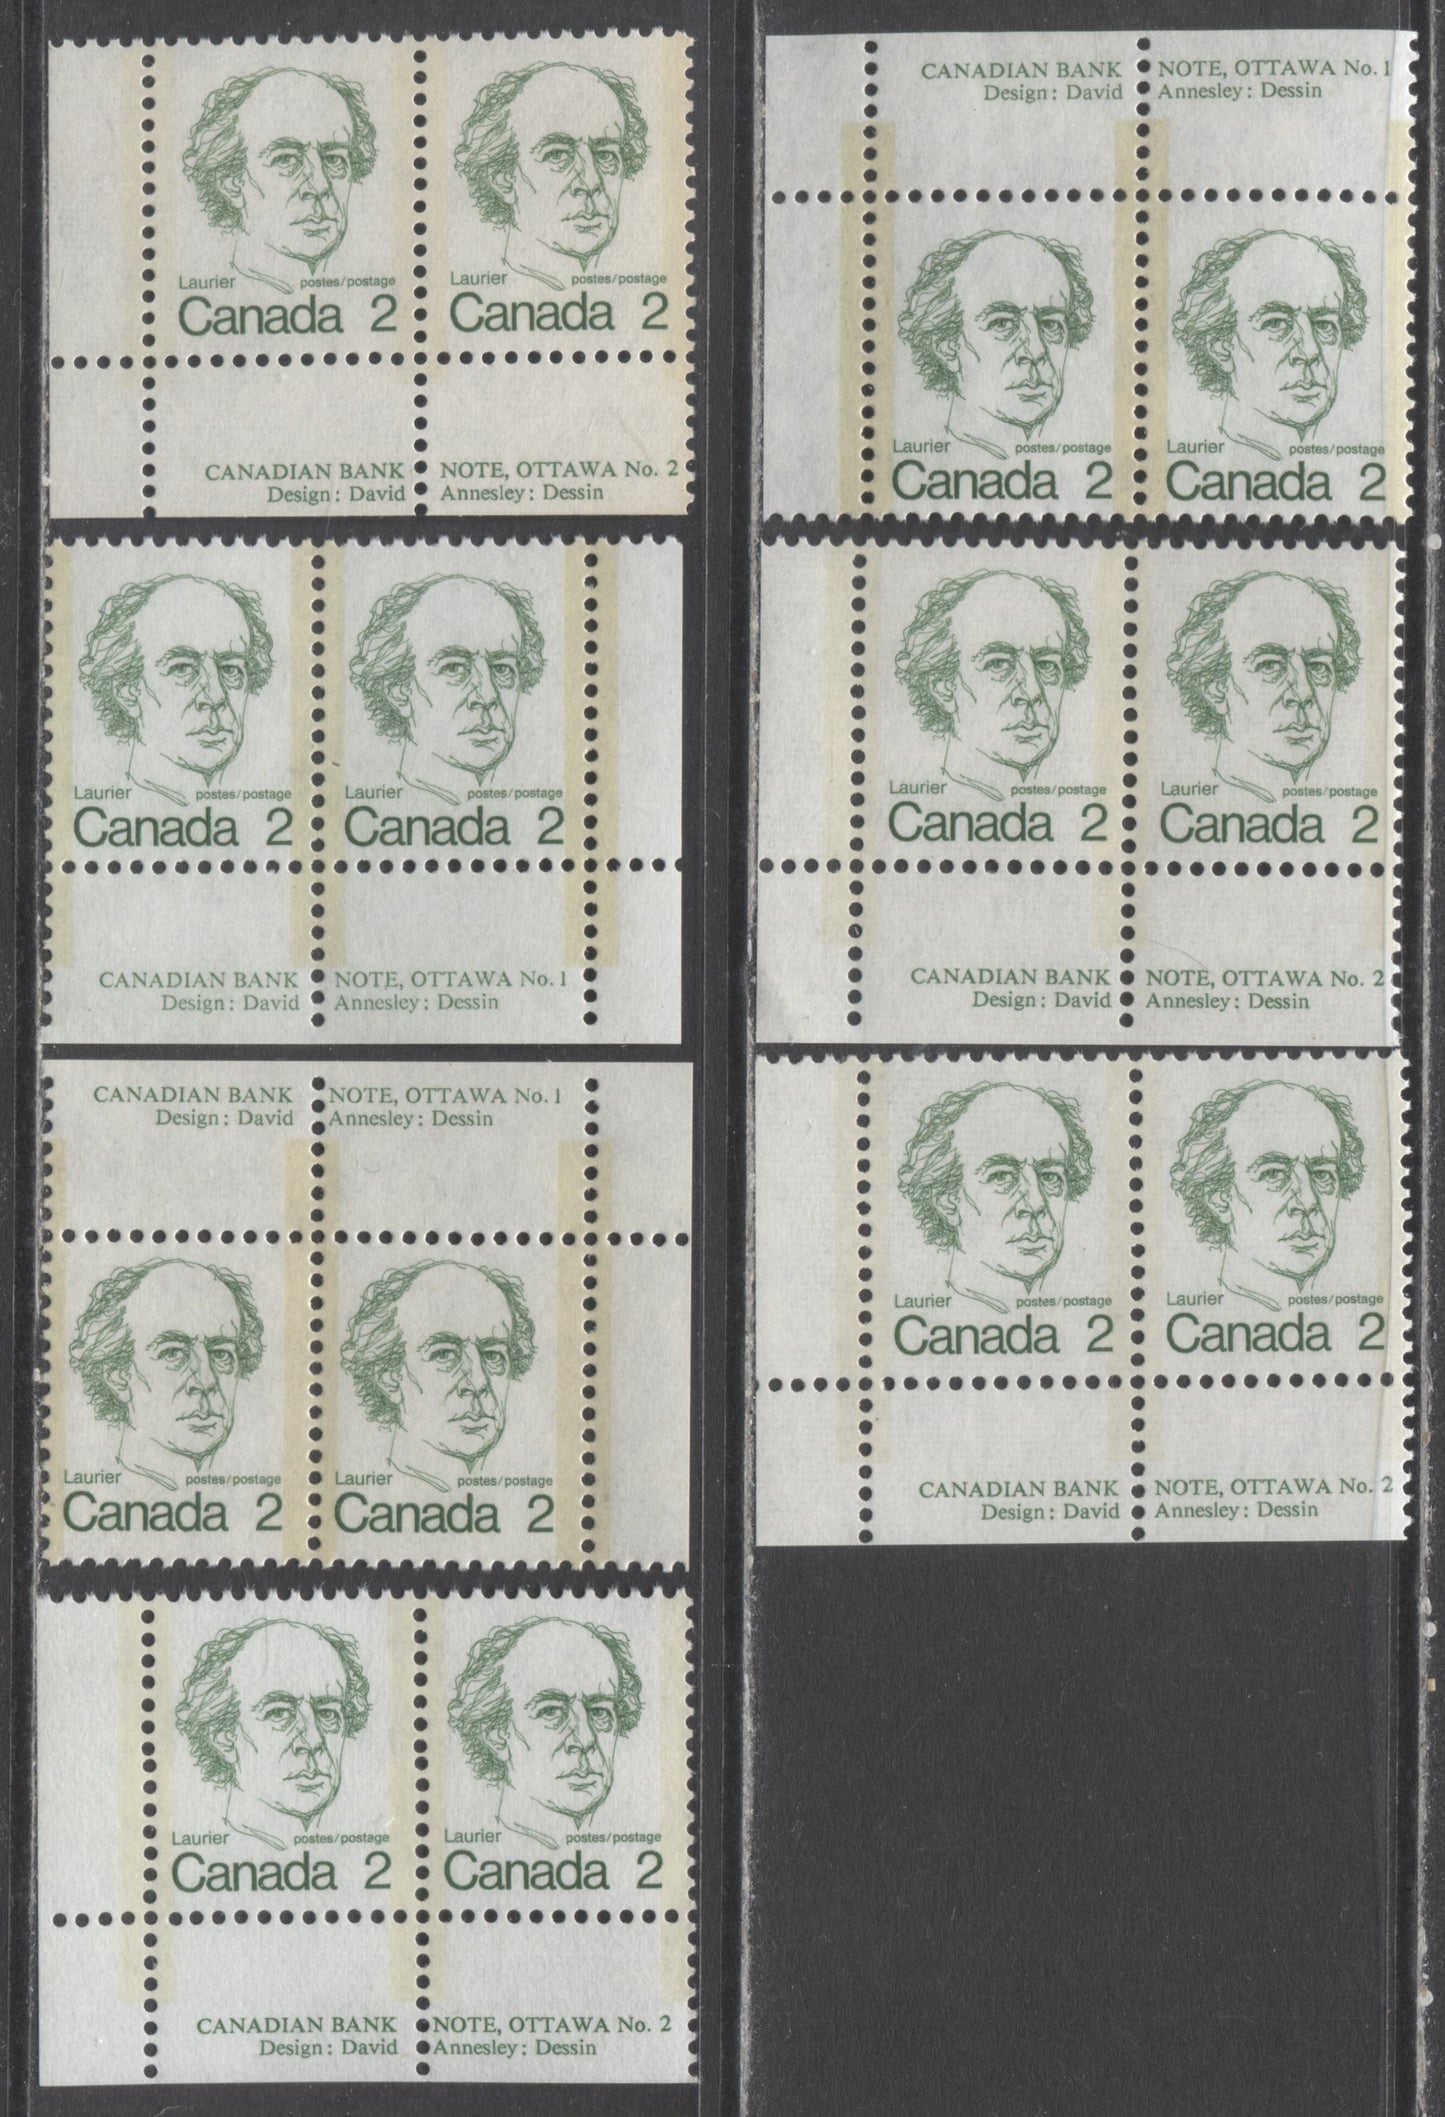 Lot 298 Canada #587v, 587, 587iii 2c Green Sir Wilfred Laurier, 1973 - 1976 Caricature Issue, 7 VFNH Plate Pairs On Various DF, MF & LF Papers Including Unlisted Types